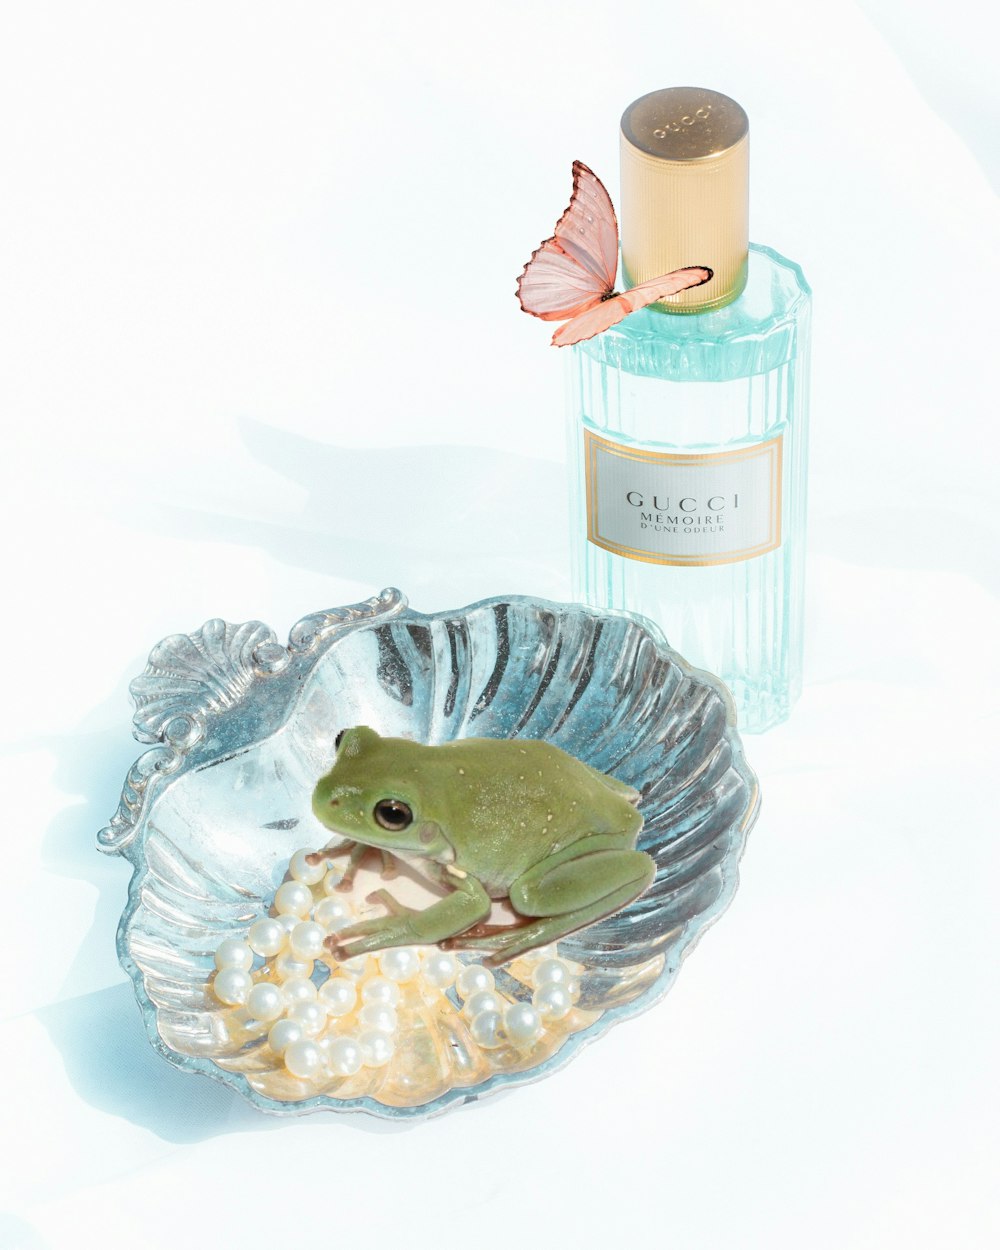 green frog figurine beside pink and white bottle